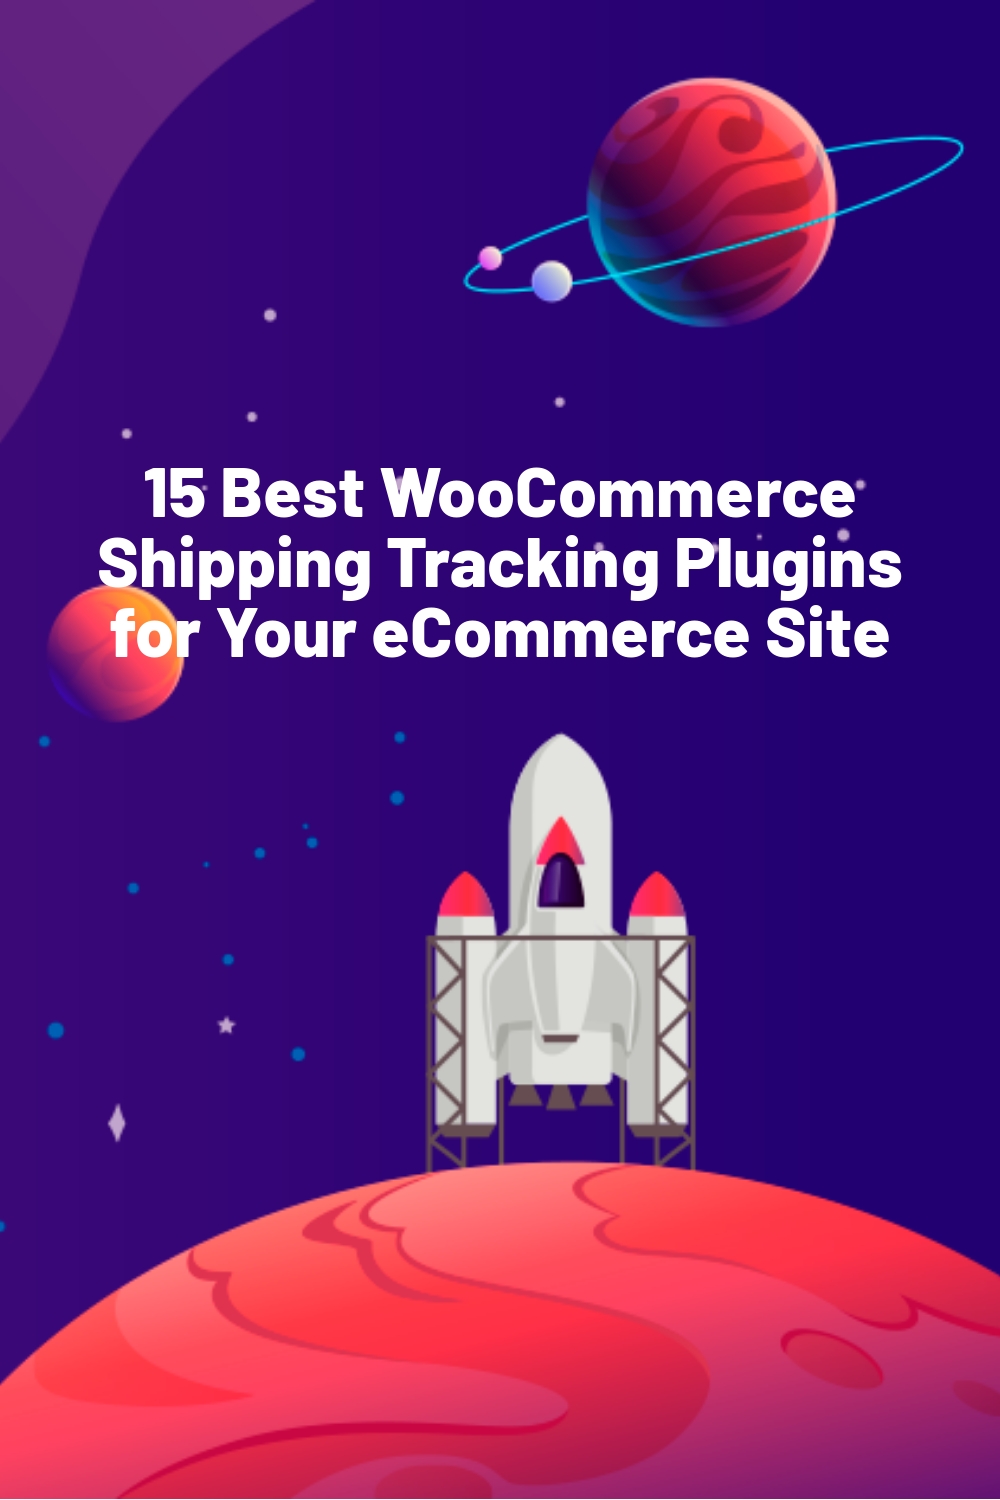 15 Best WooCommerce Shipping Tracking Plugins for Your eCommerce Site